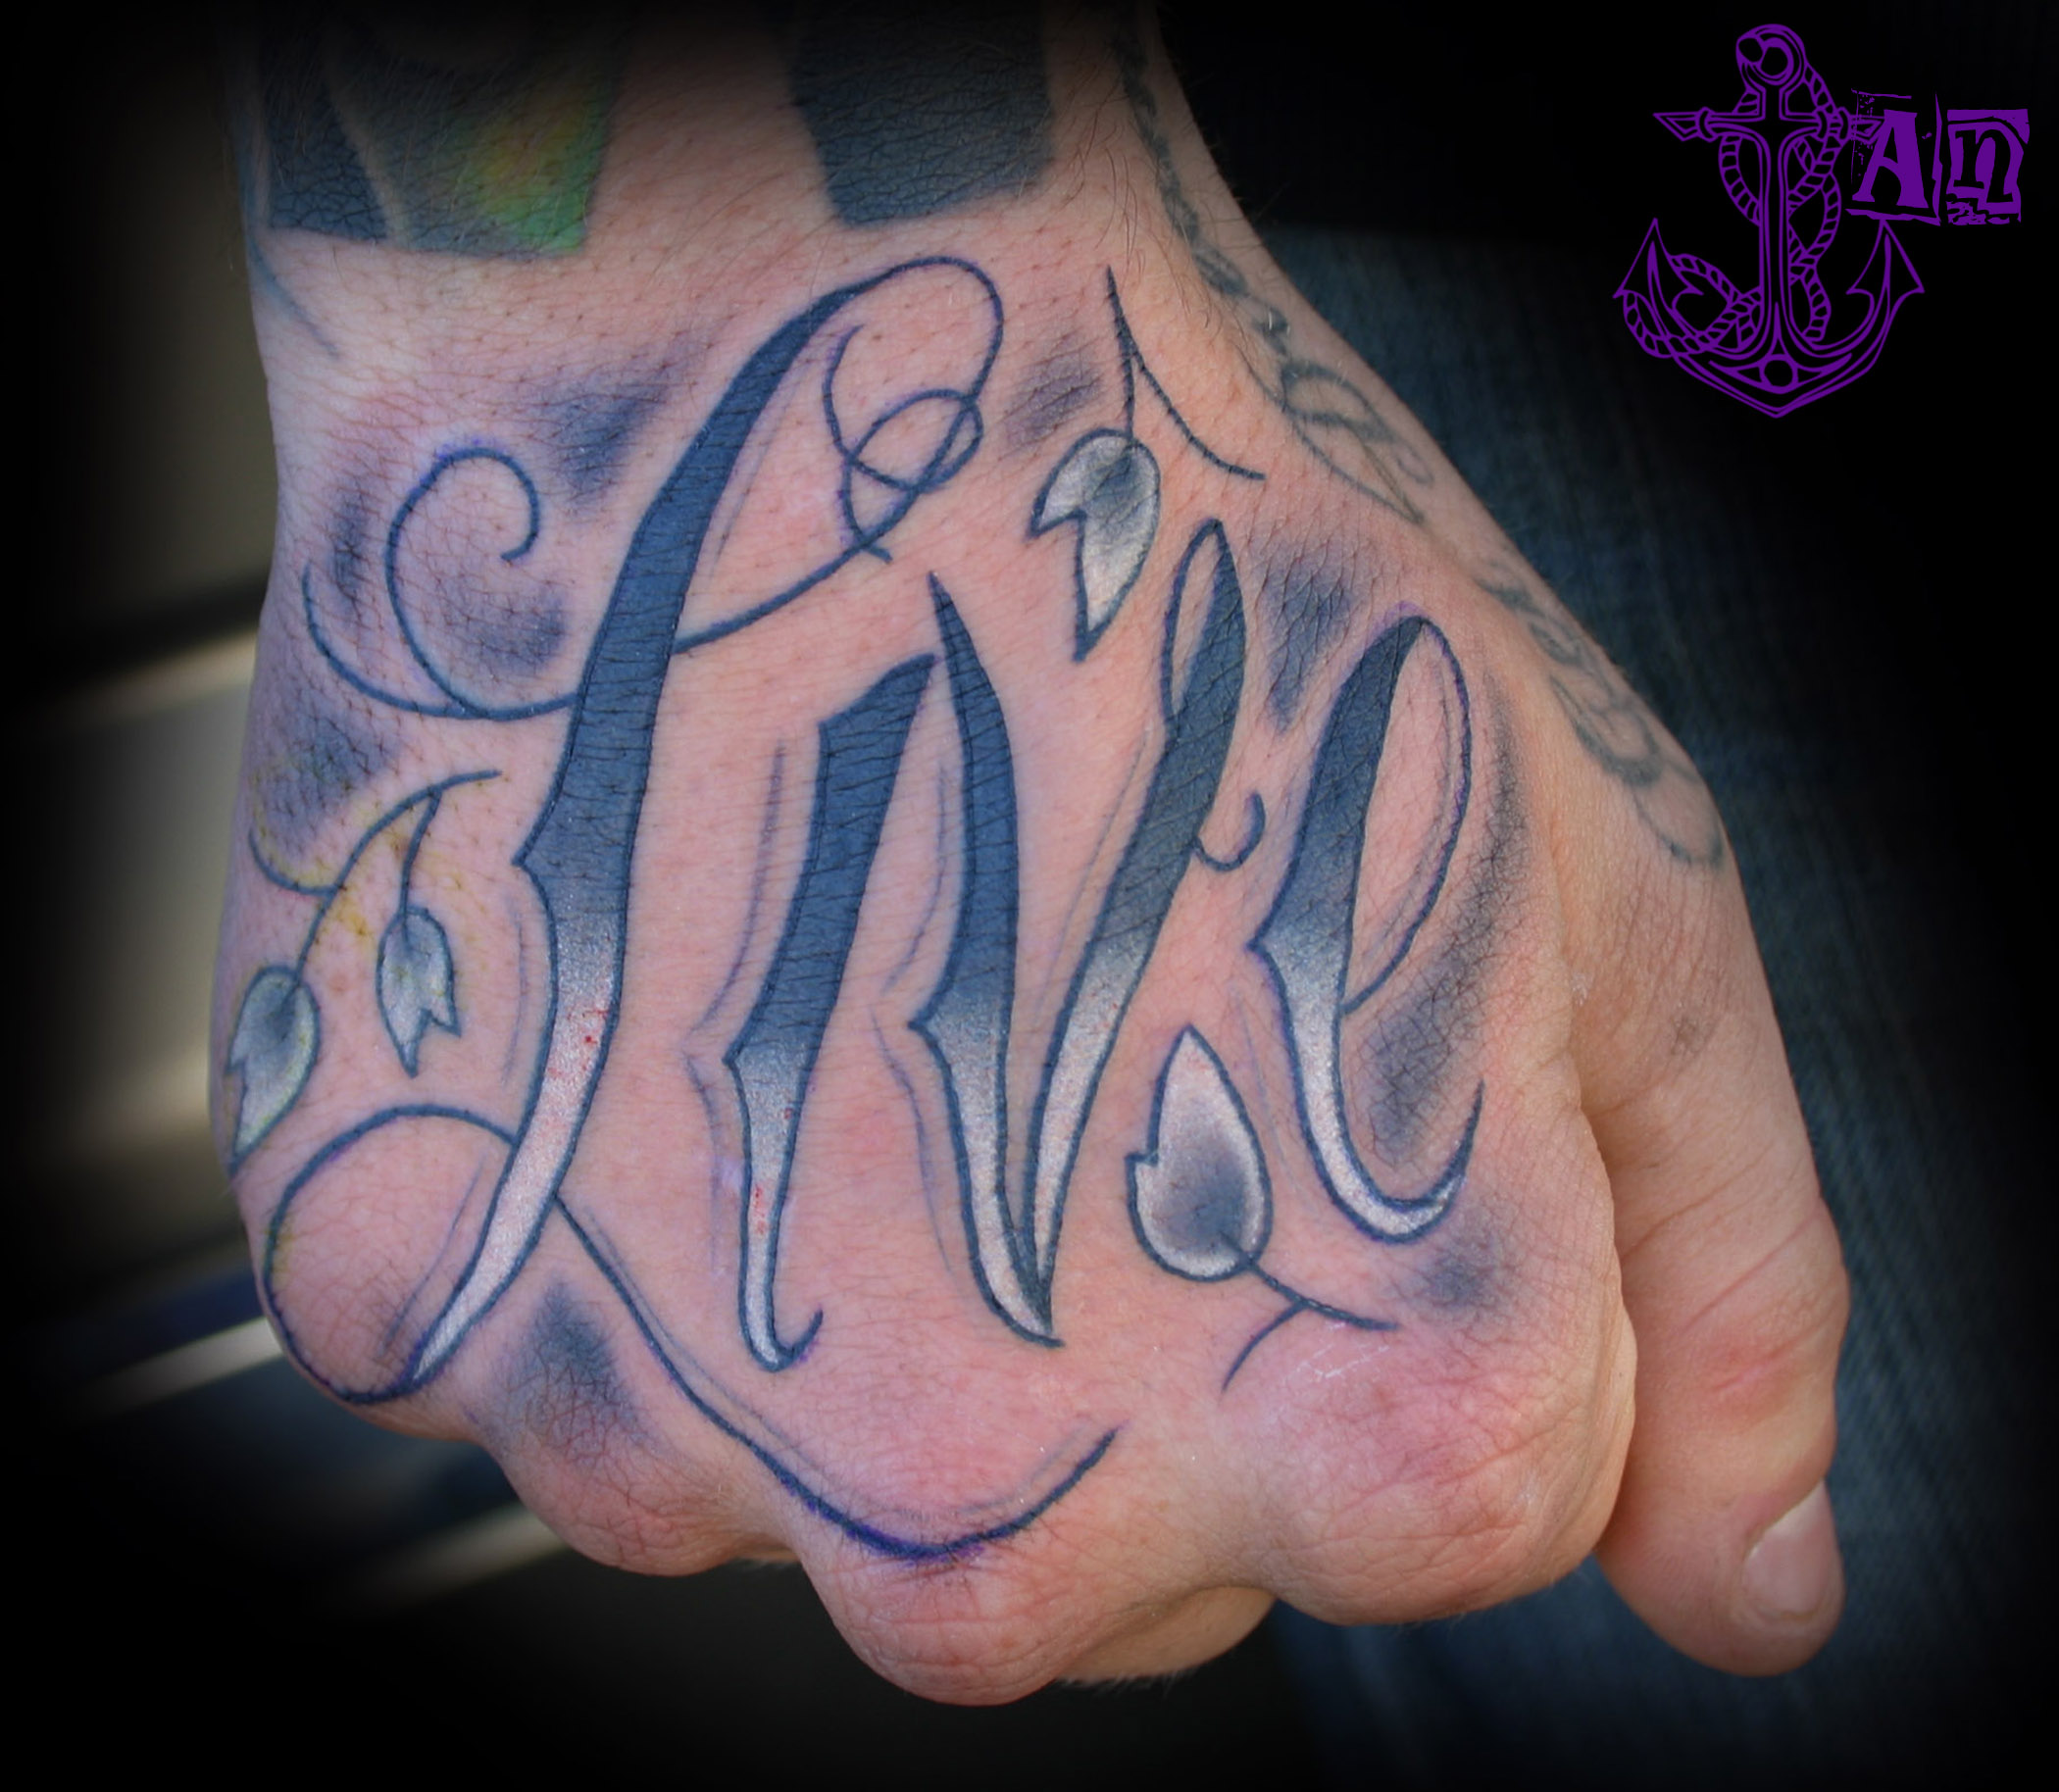 Hand drawn tattoo style letter